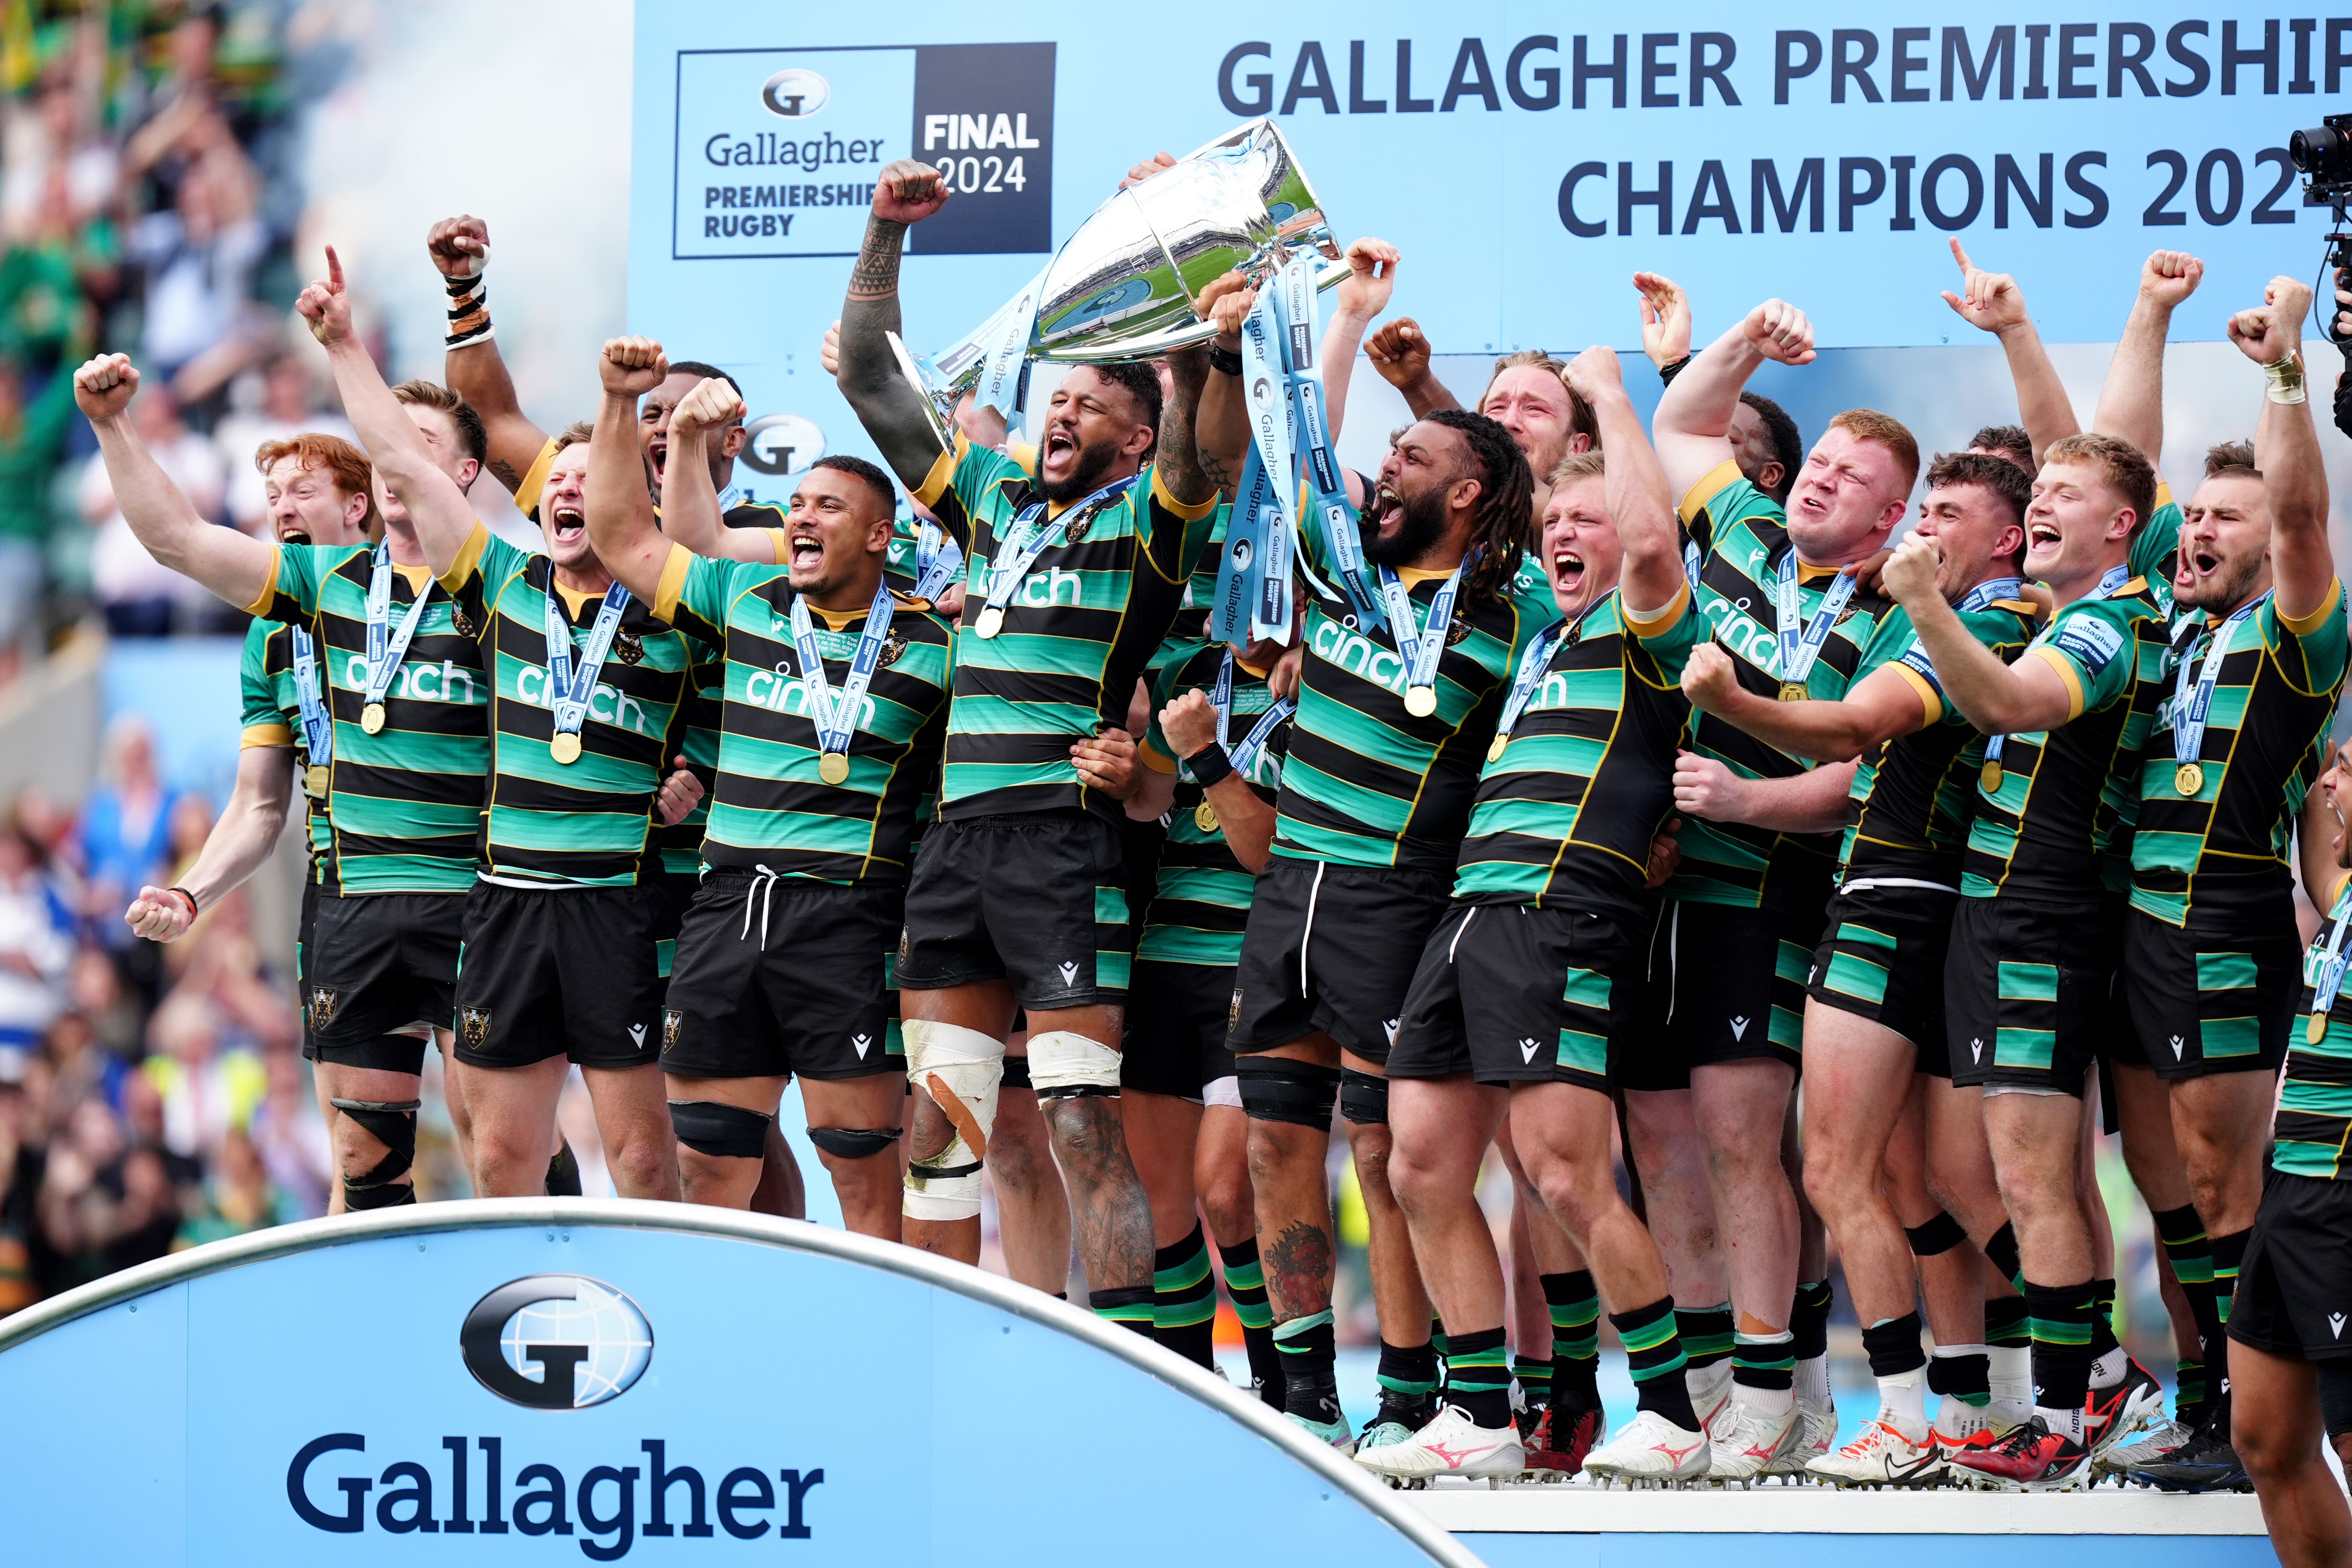 Northampton battled to victory over Bath in the final